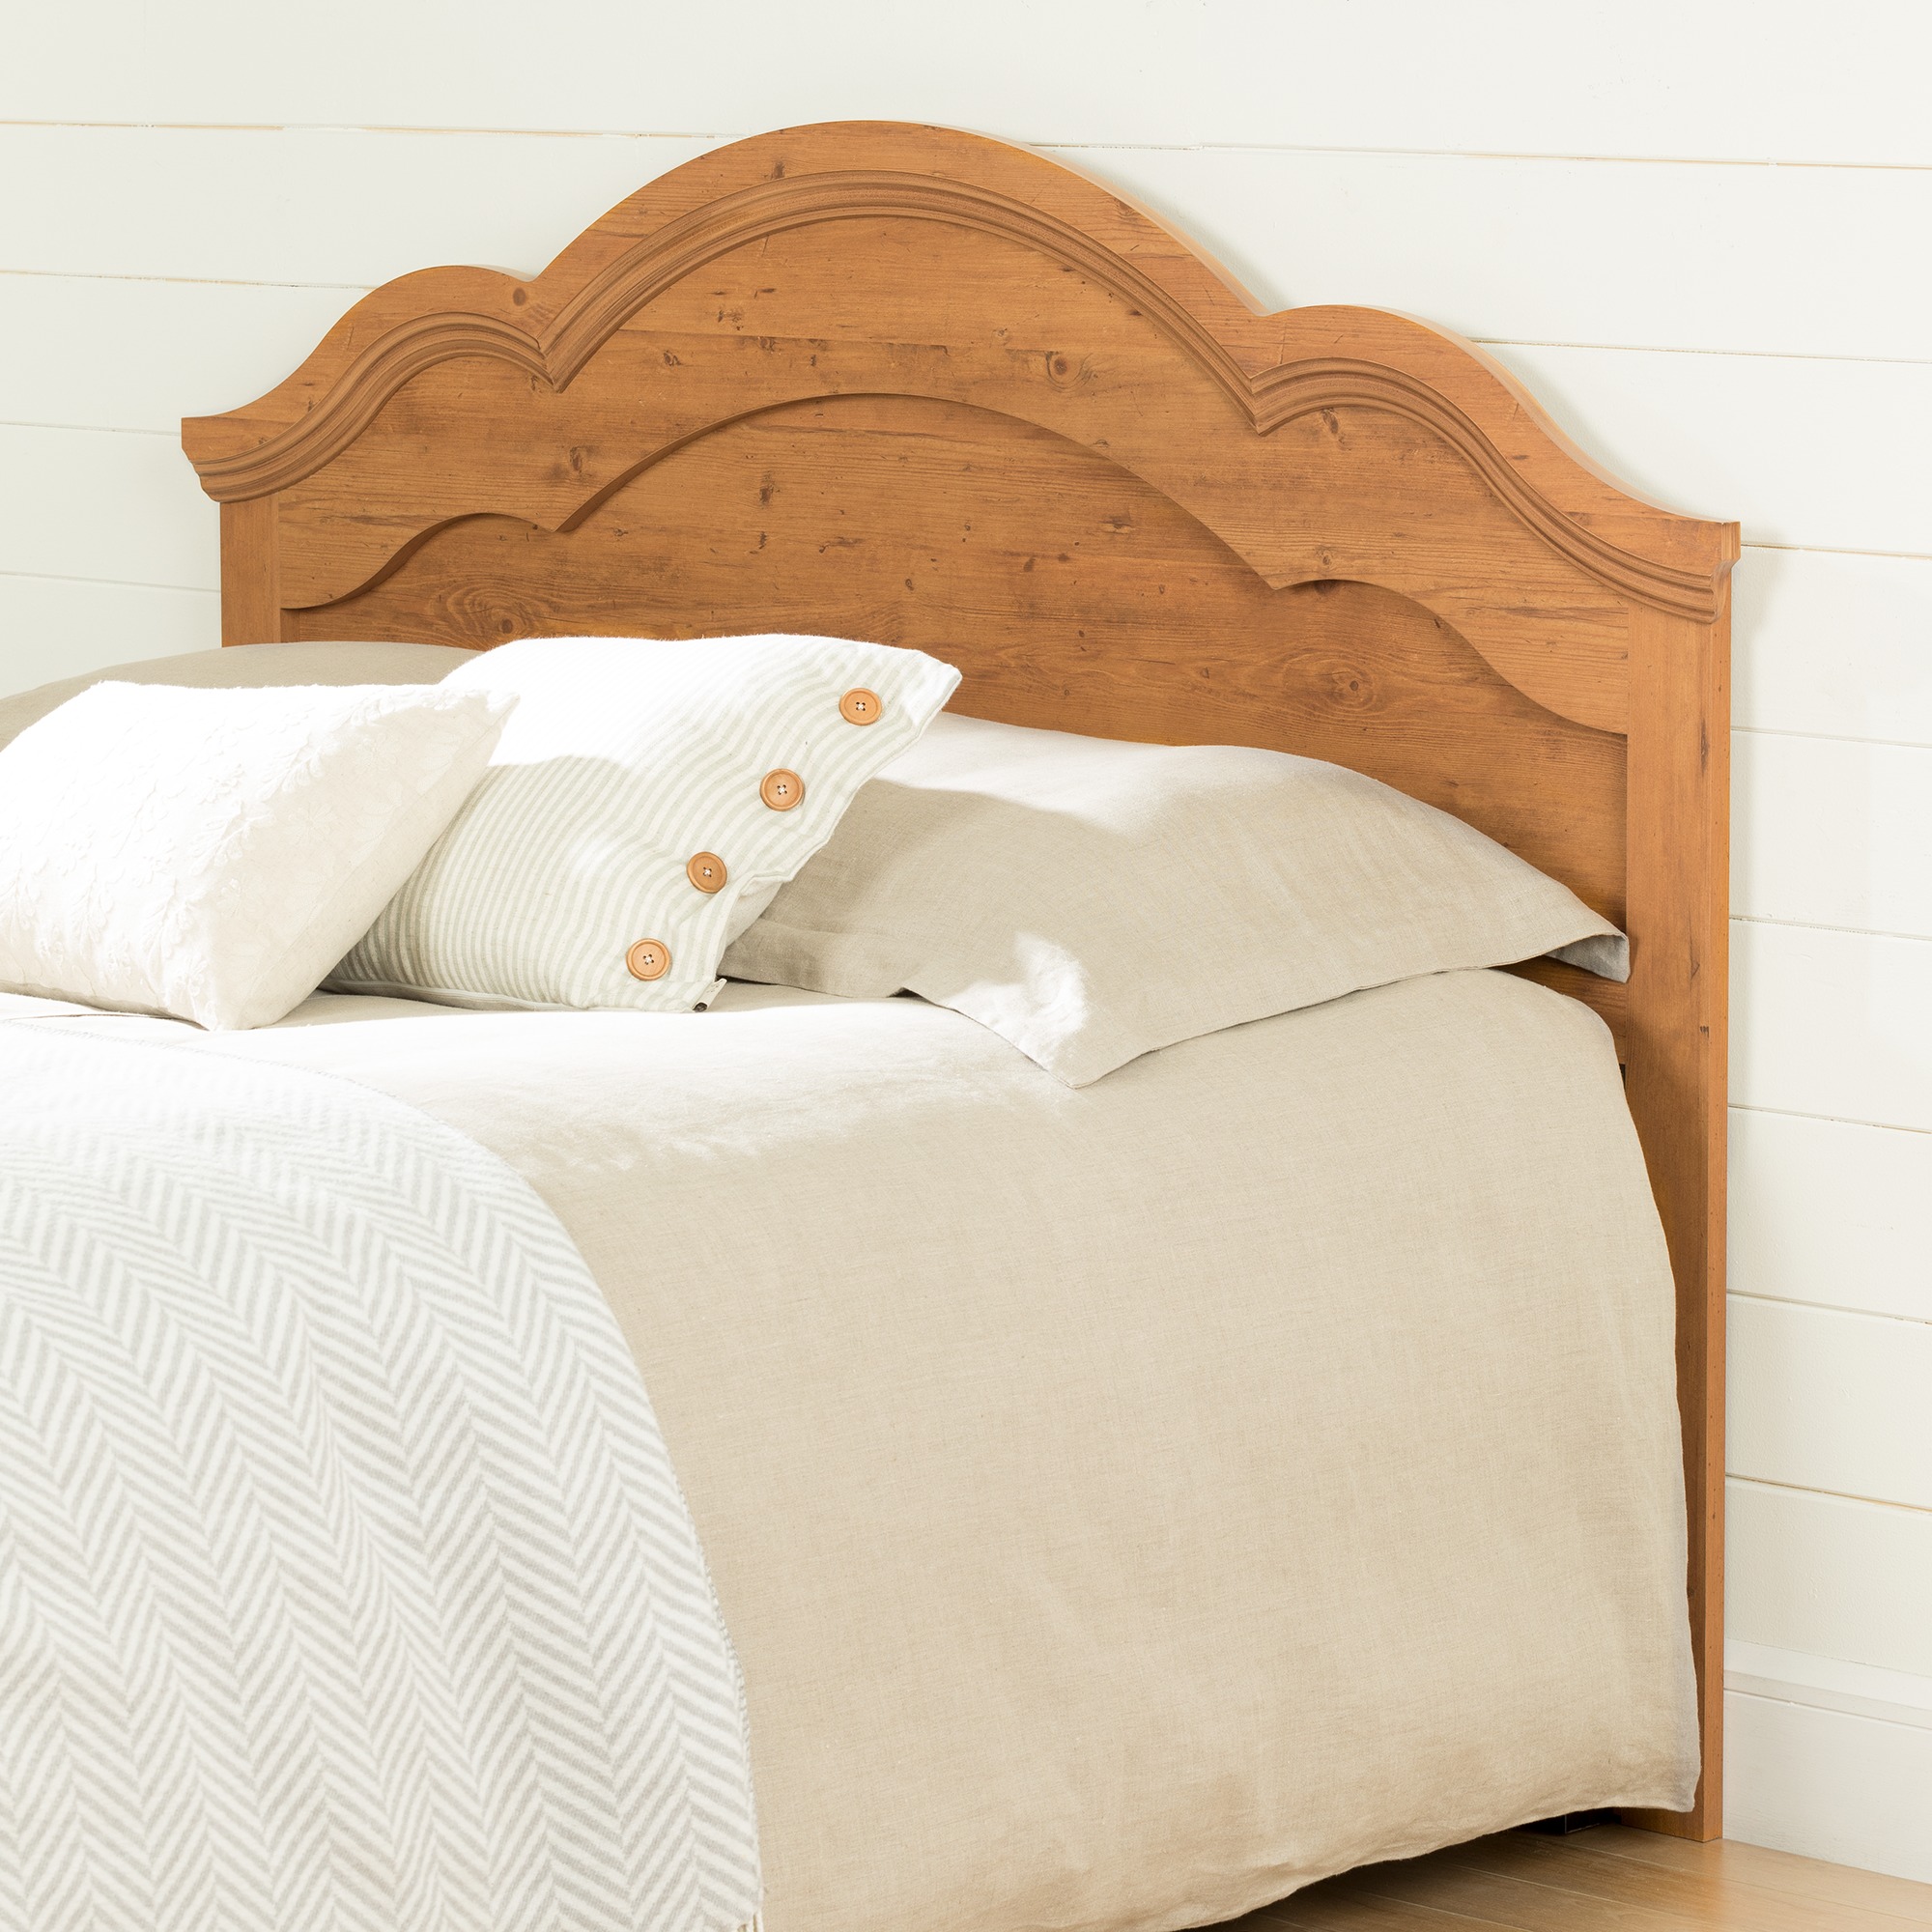 South Shore Prairie Full/Queen Headboard, Country Pine - image 2 of 7